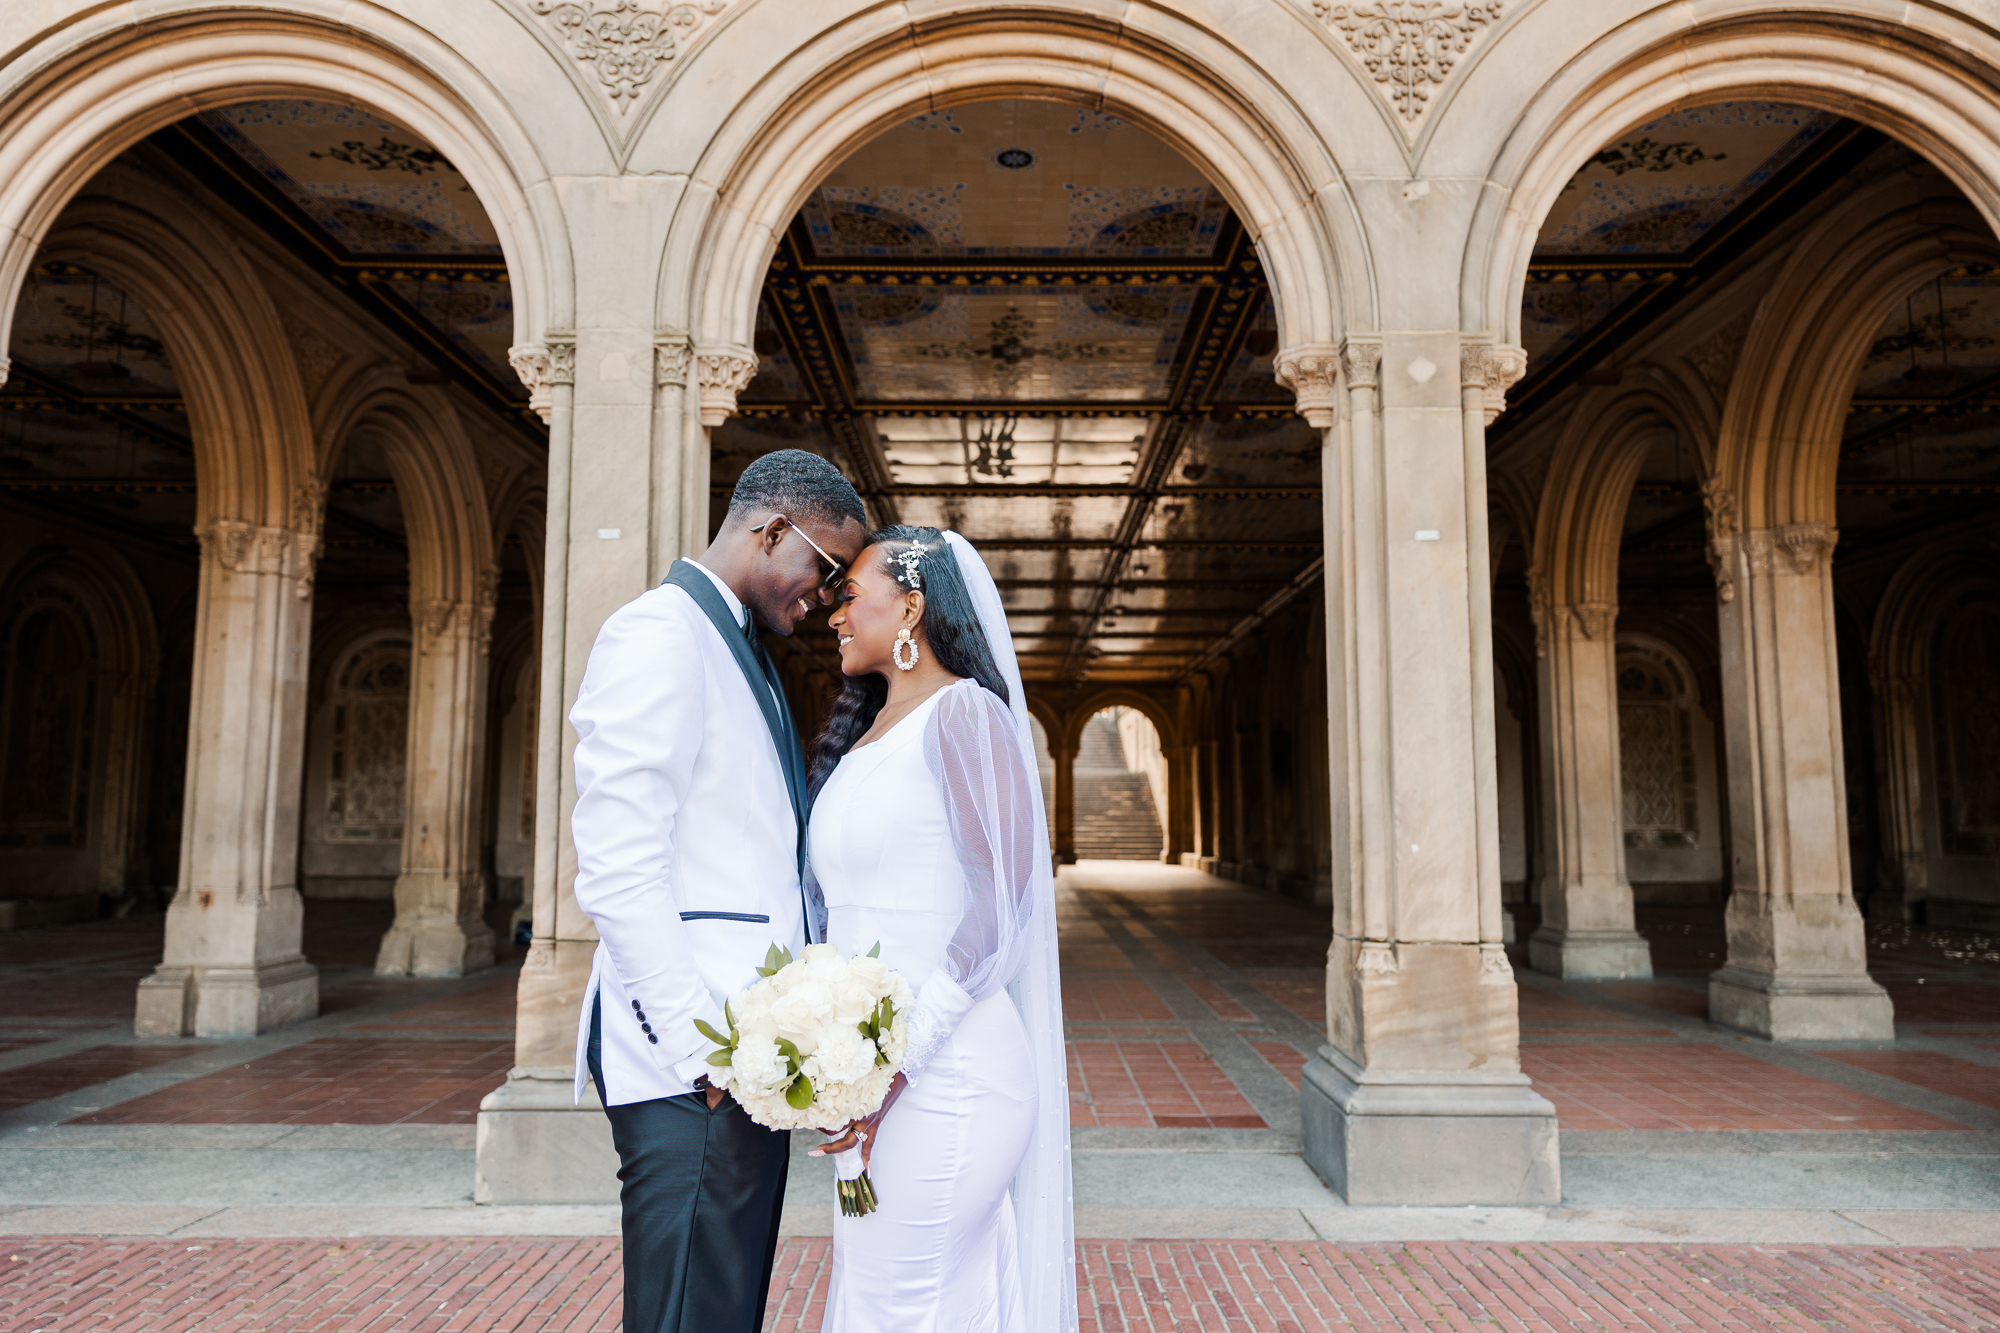 Lovely Central Park Wedding Photos on Cherry Hill in Fall